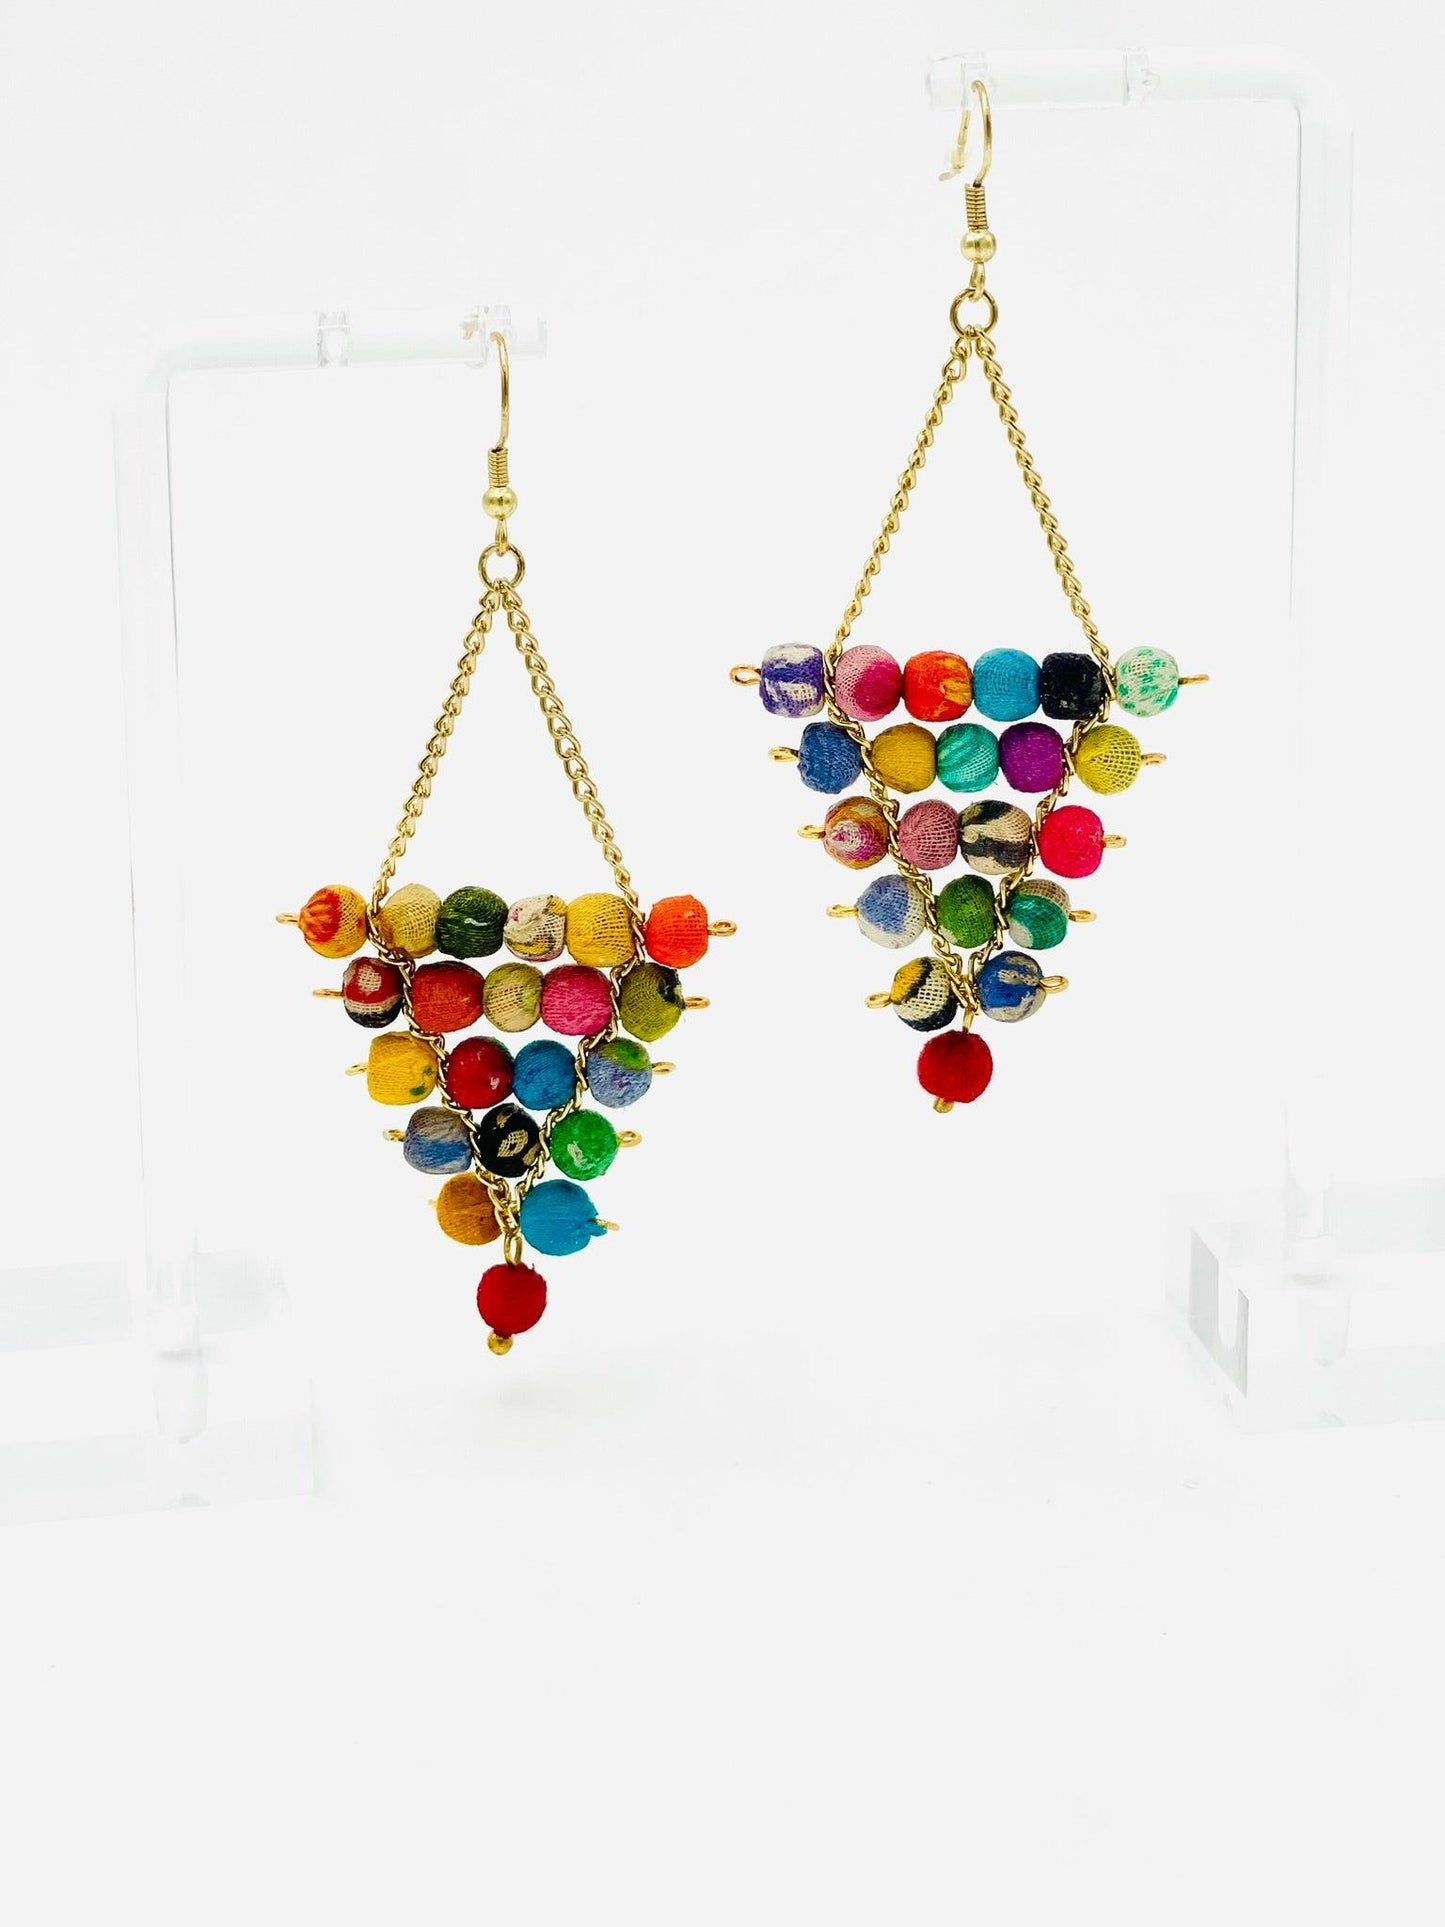 Fair Trade Grape Earrings with Upcycled Cotton Fabric - Transcend